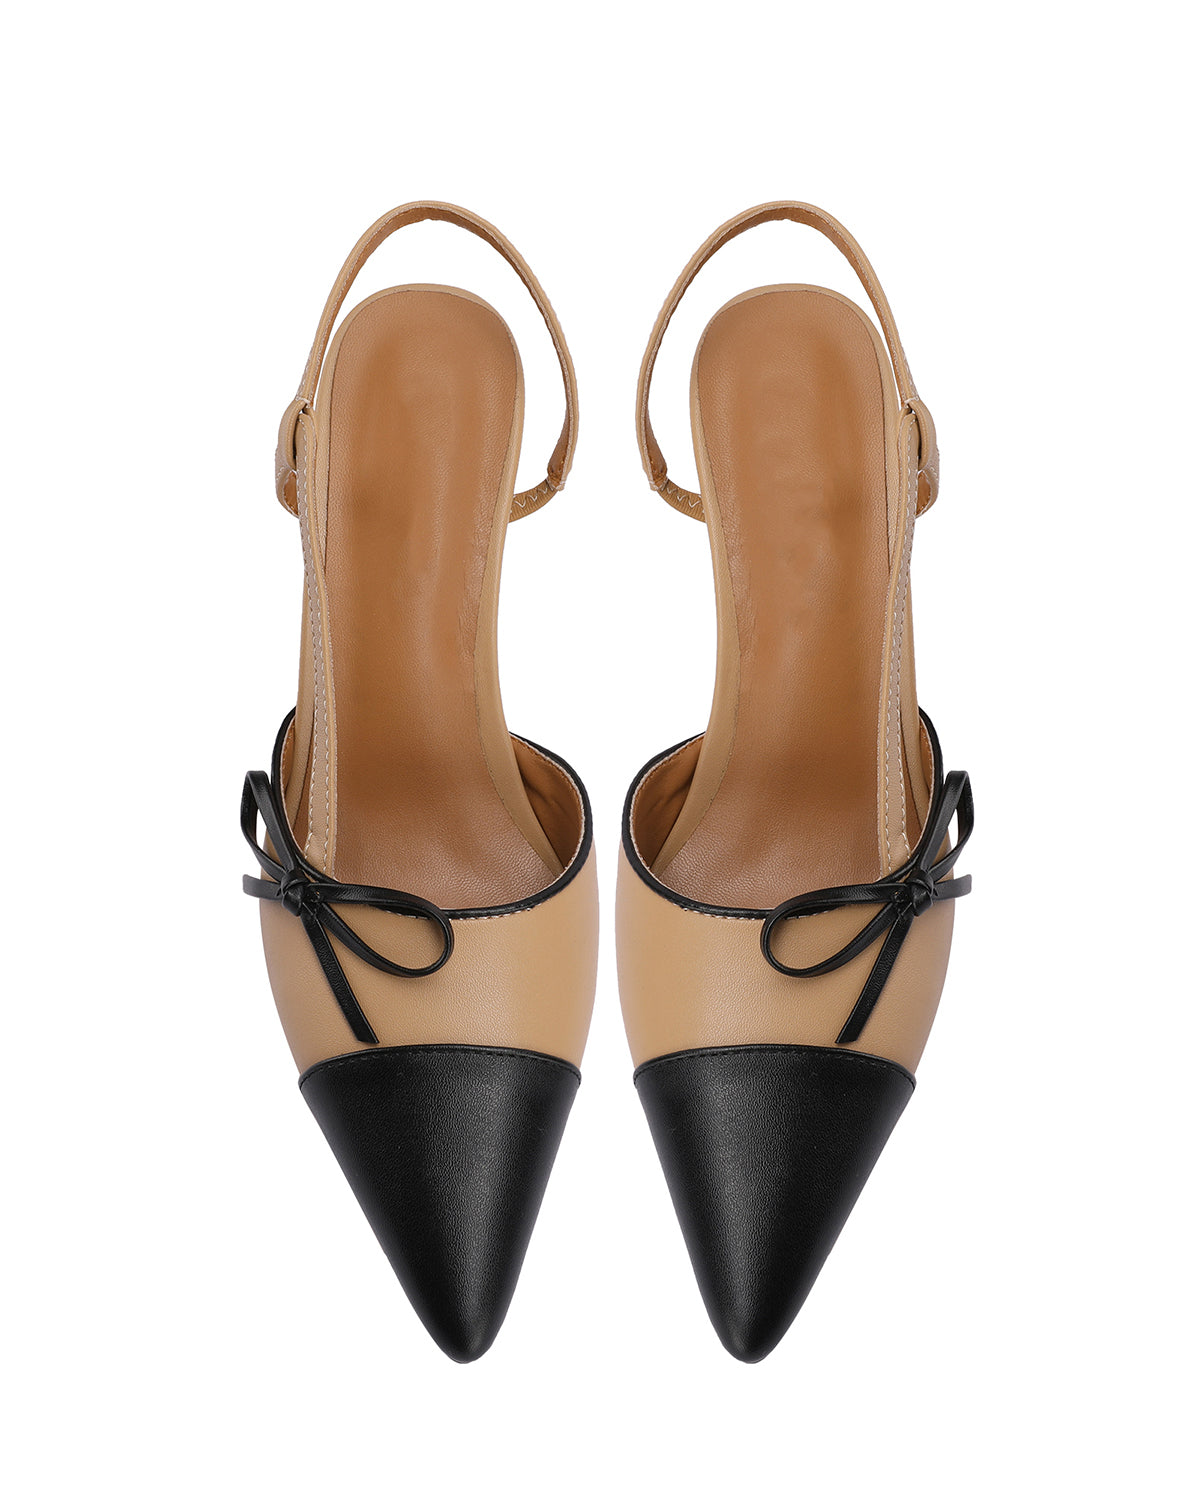 Matte leather slingback high heel pump shoes for ladies